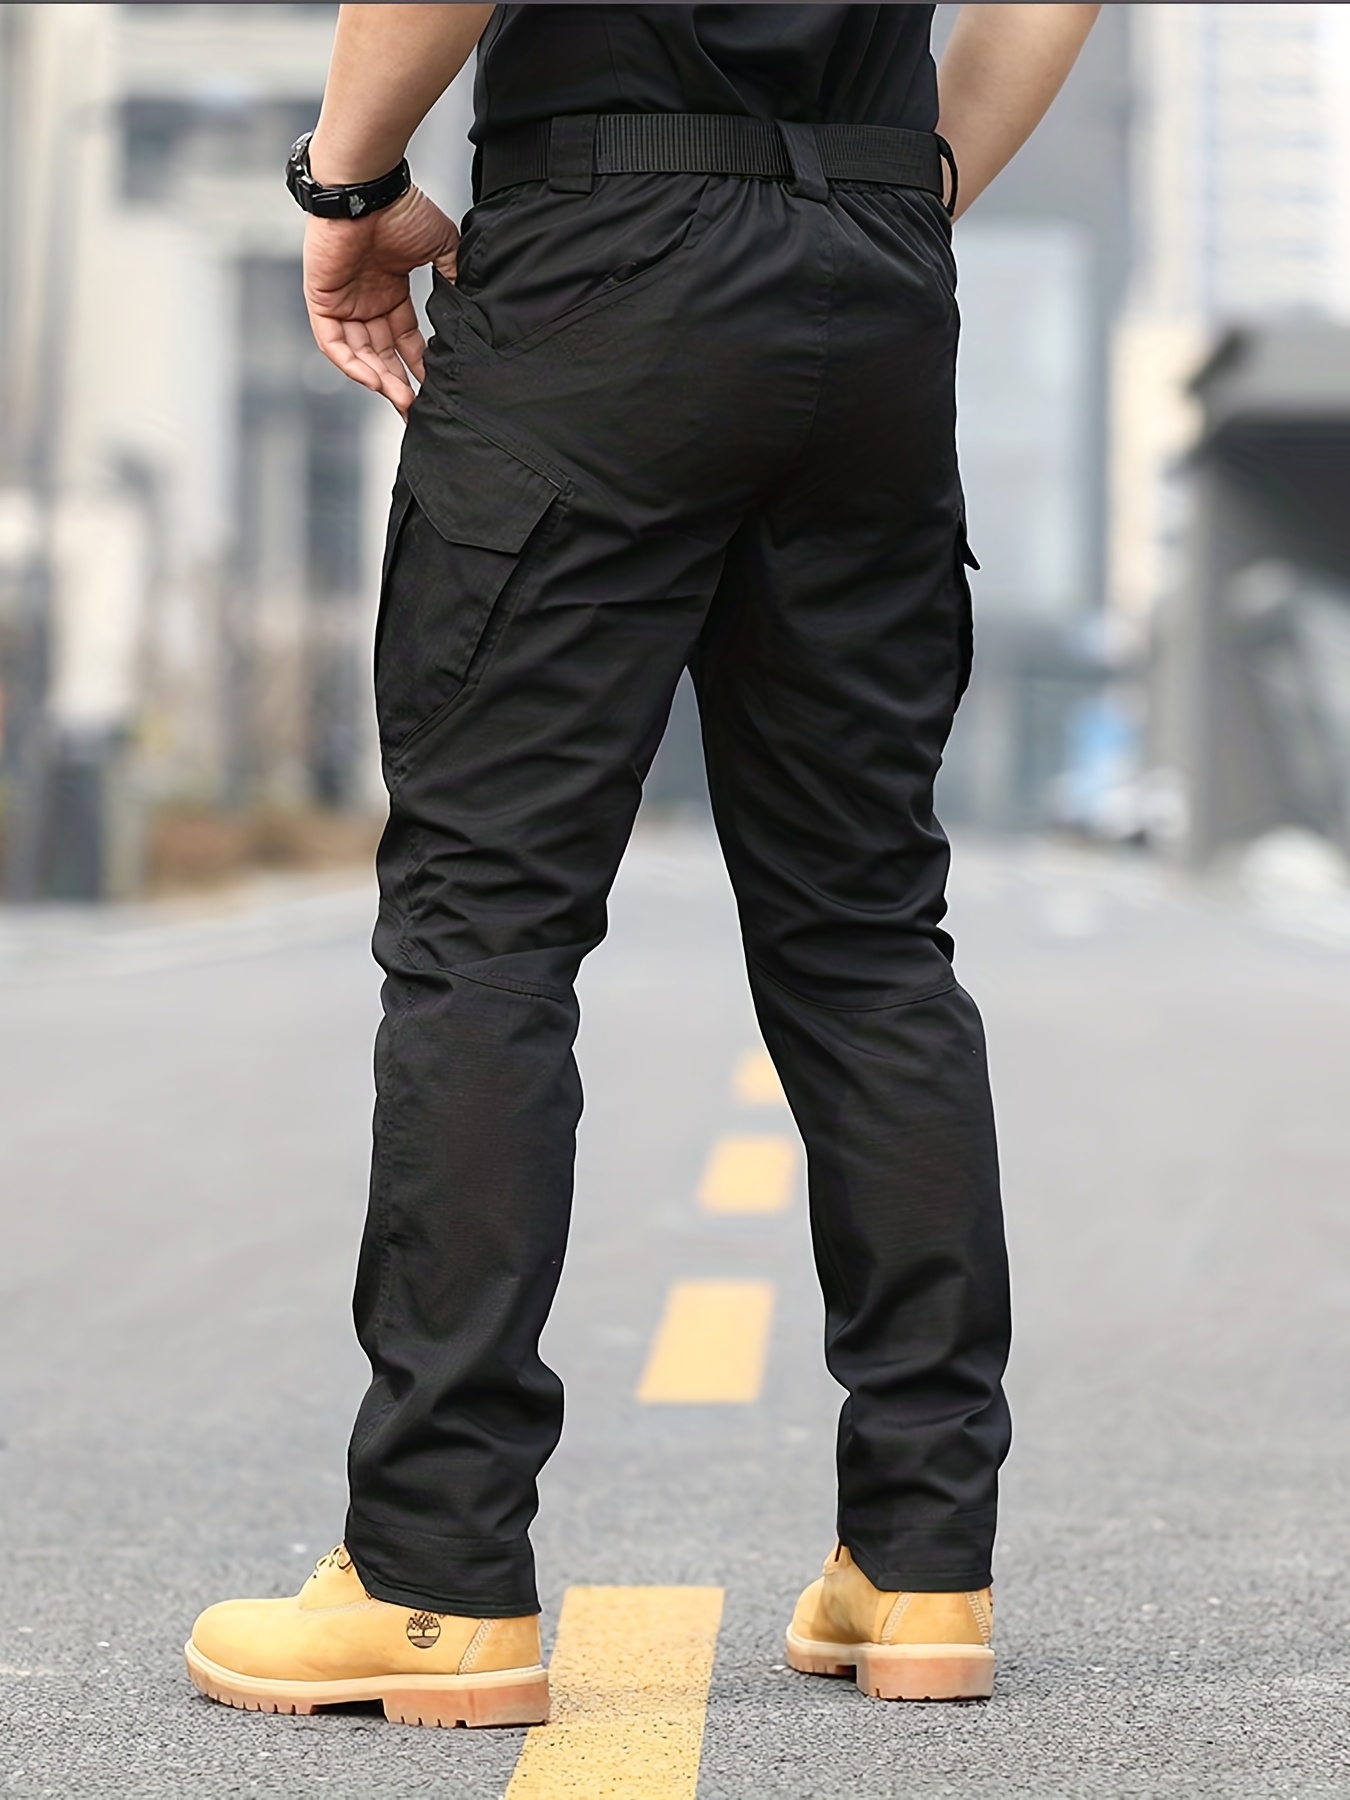 Men's Cargo Work Hiking Pants Lightweight Water Resistant Quick Dry Fishing  Travel Camping Outdoor Breathable Multi Pockets : : Clothing